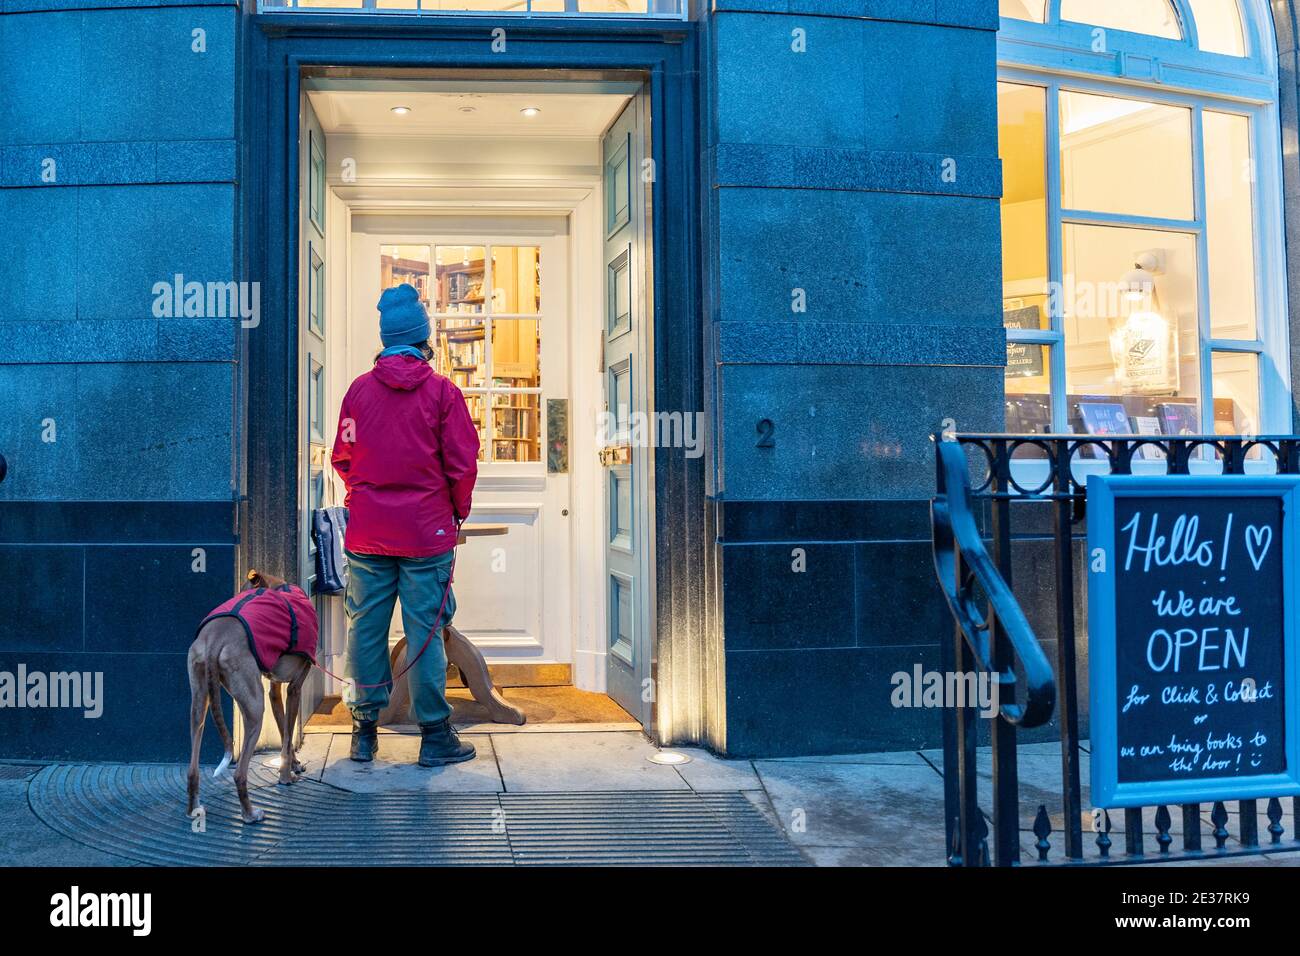 Edinburgh, Scotland, UK. 17 January 2021. On first Sunday after tightening of national lockdown rules in Scotland a customer waits outside Topping & Co bookshop to use click & collect service. Iain Masterton/Alamy Live News Stock Photo